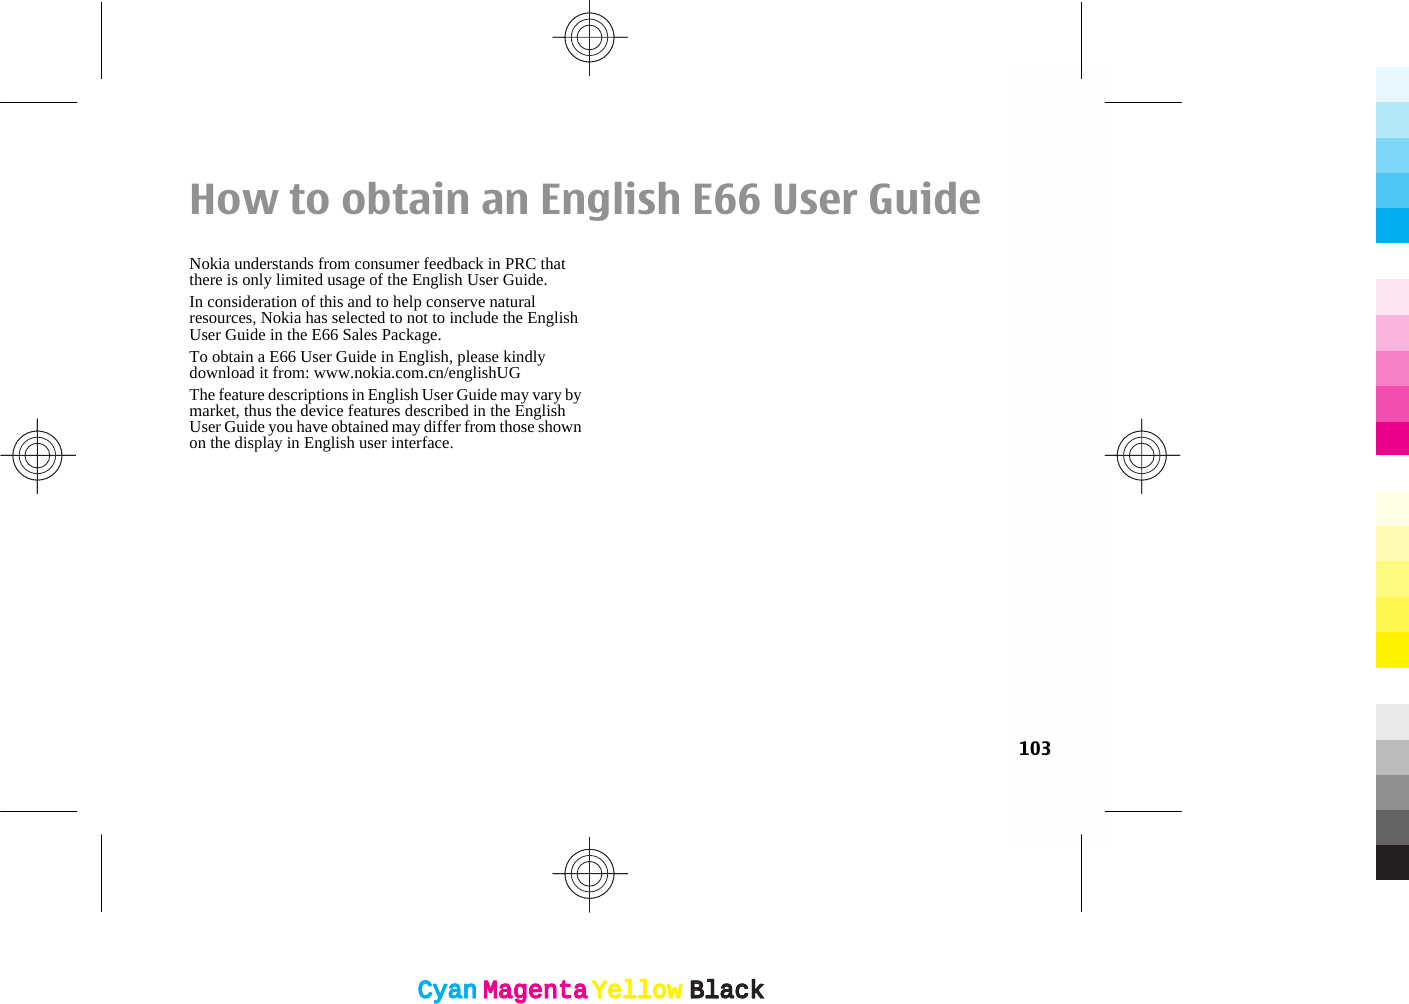 How to obtain an English E66 User GuideNokia understands from consumer feedback in PRC thatthere is only limited usage of the English User Guide.In consideration of this and to help conserve naturalresources, Nokia has selected to not to include the EnglishUser Guide in the E66 Sales Package.To obtain a E66 User Guide in English, please kindlydownload it from: www.nokia.com.cn/englishUGThe feature descriptions in English User Guide may vary bymarket, thus the device features described in the EnglishUser Guide you have obtained may differ from those shownon the display in English user interface.103CyanCyanMagentaMagentaYellowYellowBlackBlackCyanCyanMagentaMagentaYellowYellowBlackBlack